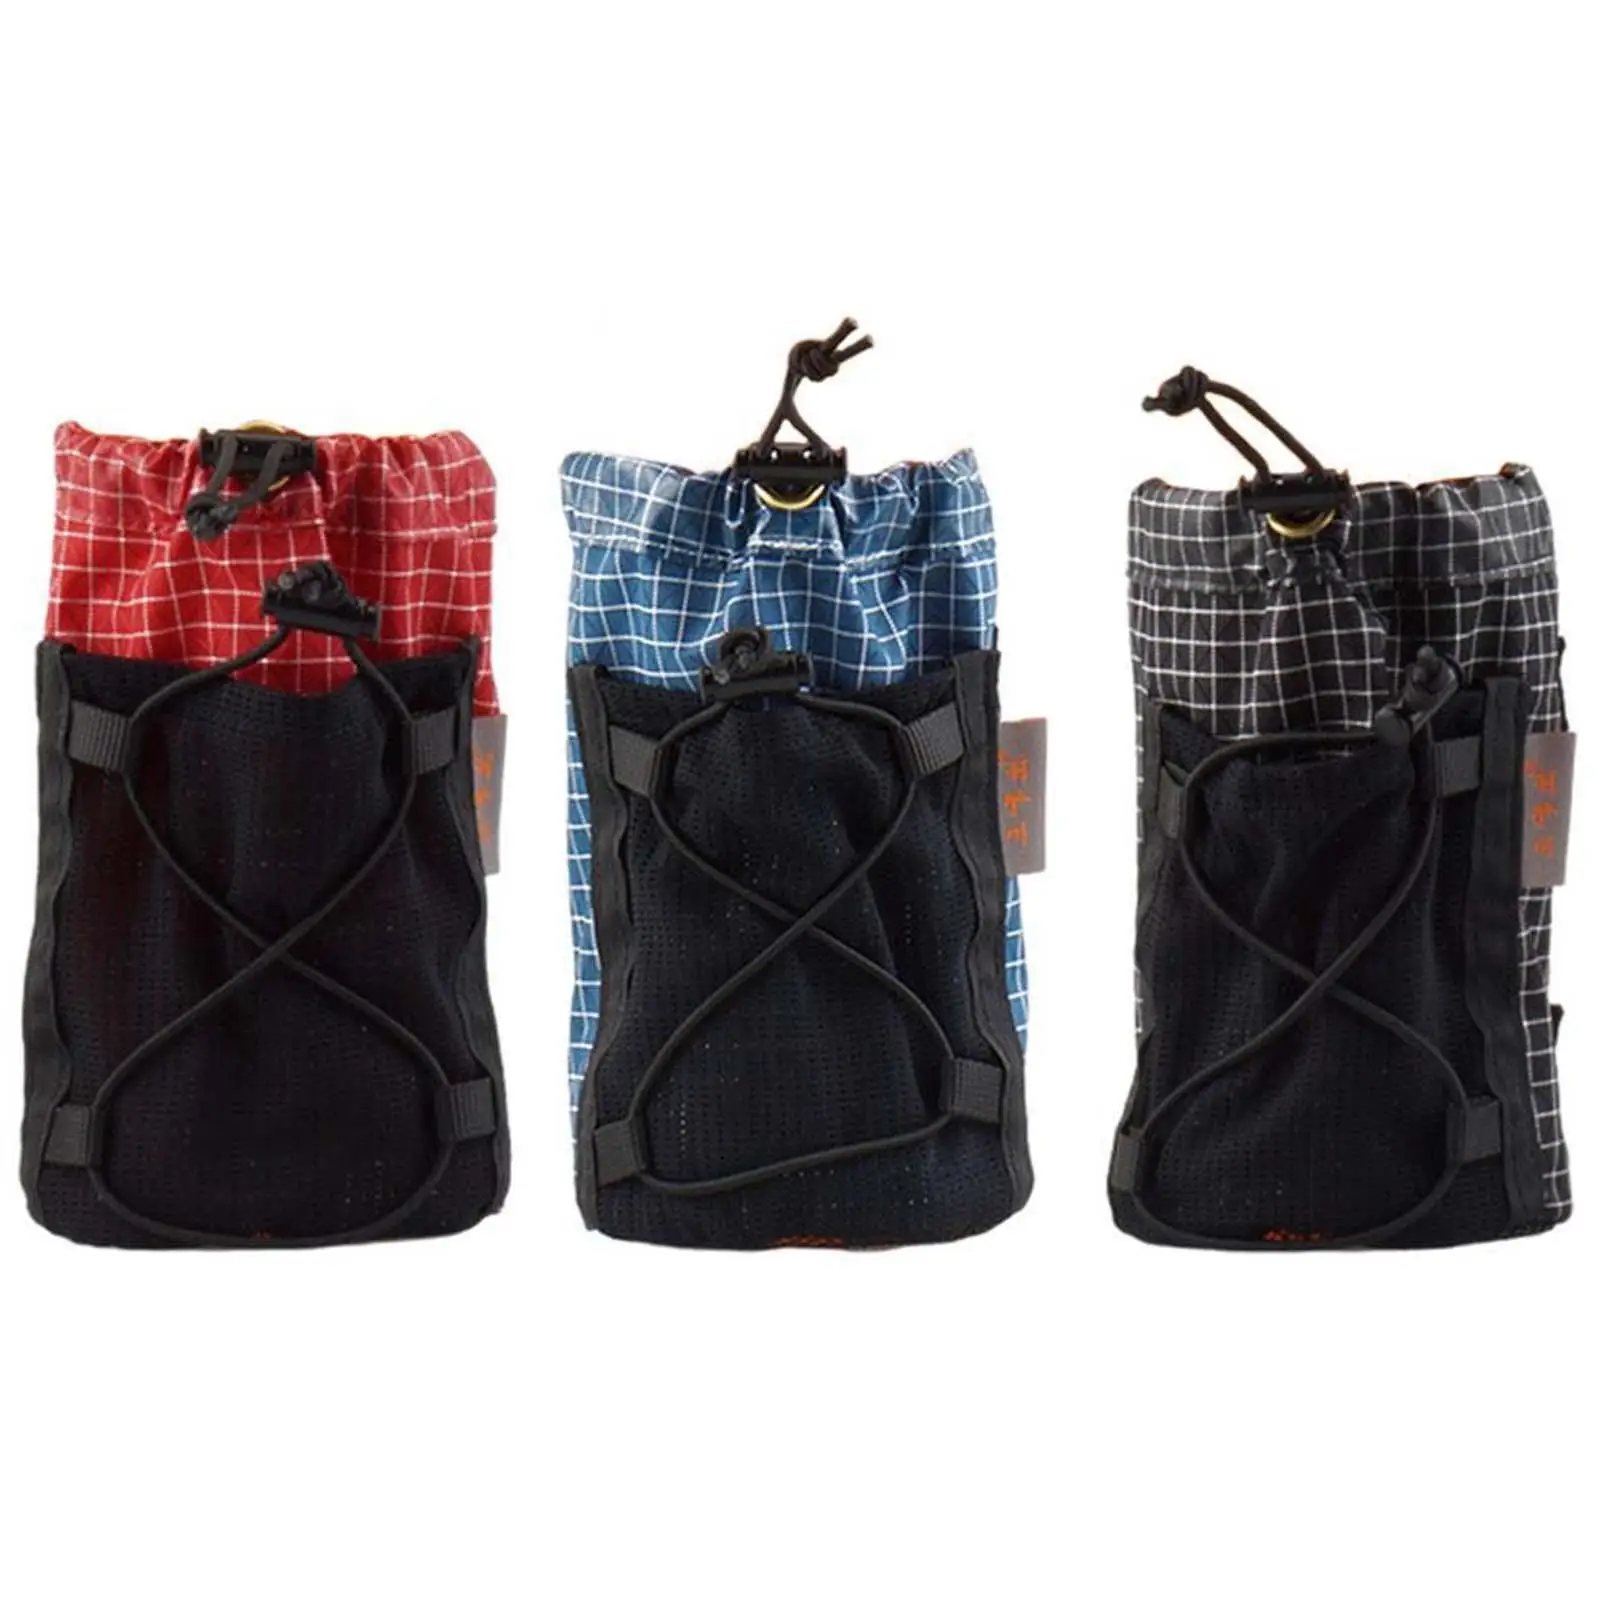 Water Bottle Holder Holds Bottles Pouch Bag  Carrier Sleeve Bag for Cycling Walking Traveling Activities Skiing